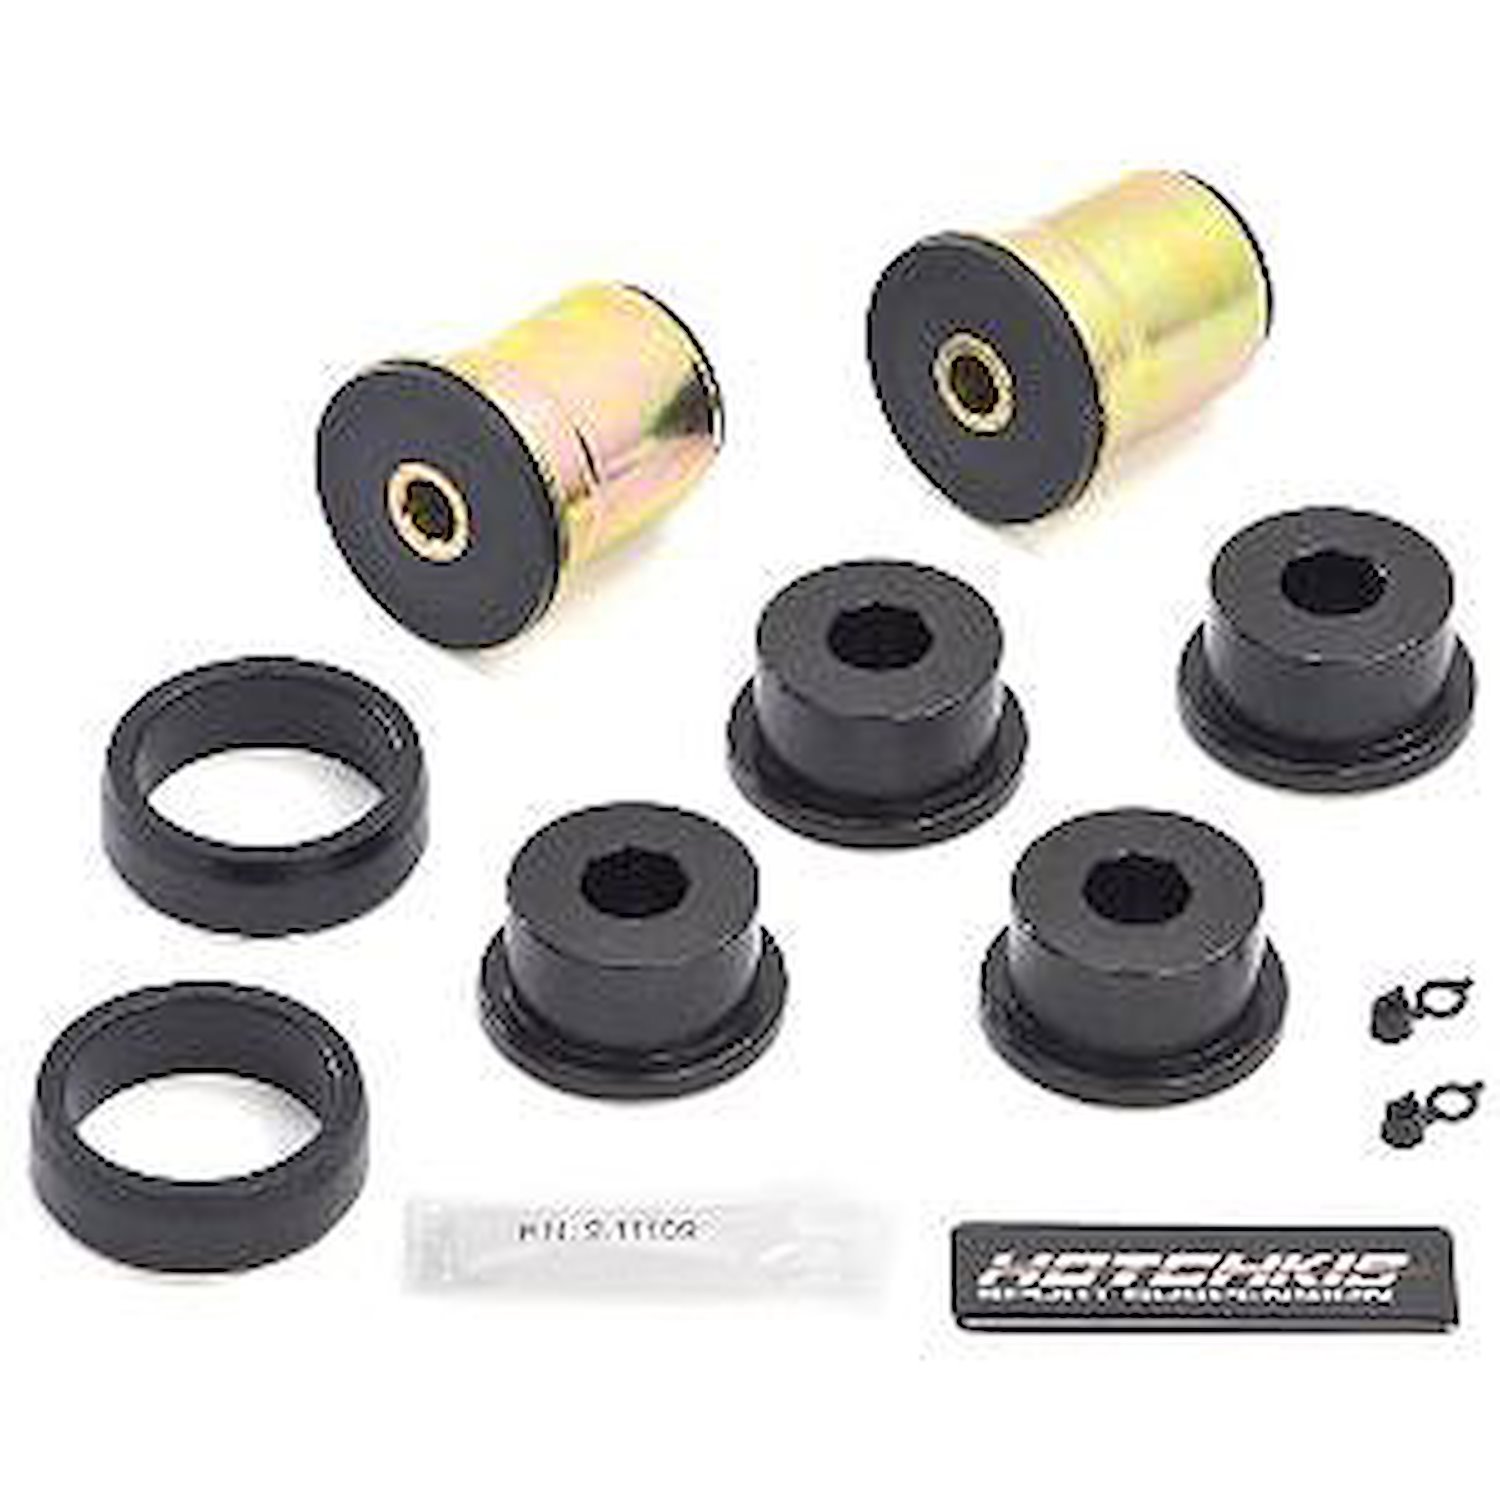 Trailing Arm Bushing Kit For Use With 515-1305,